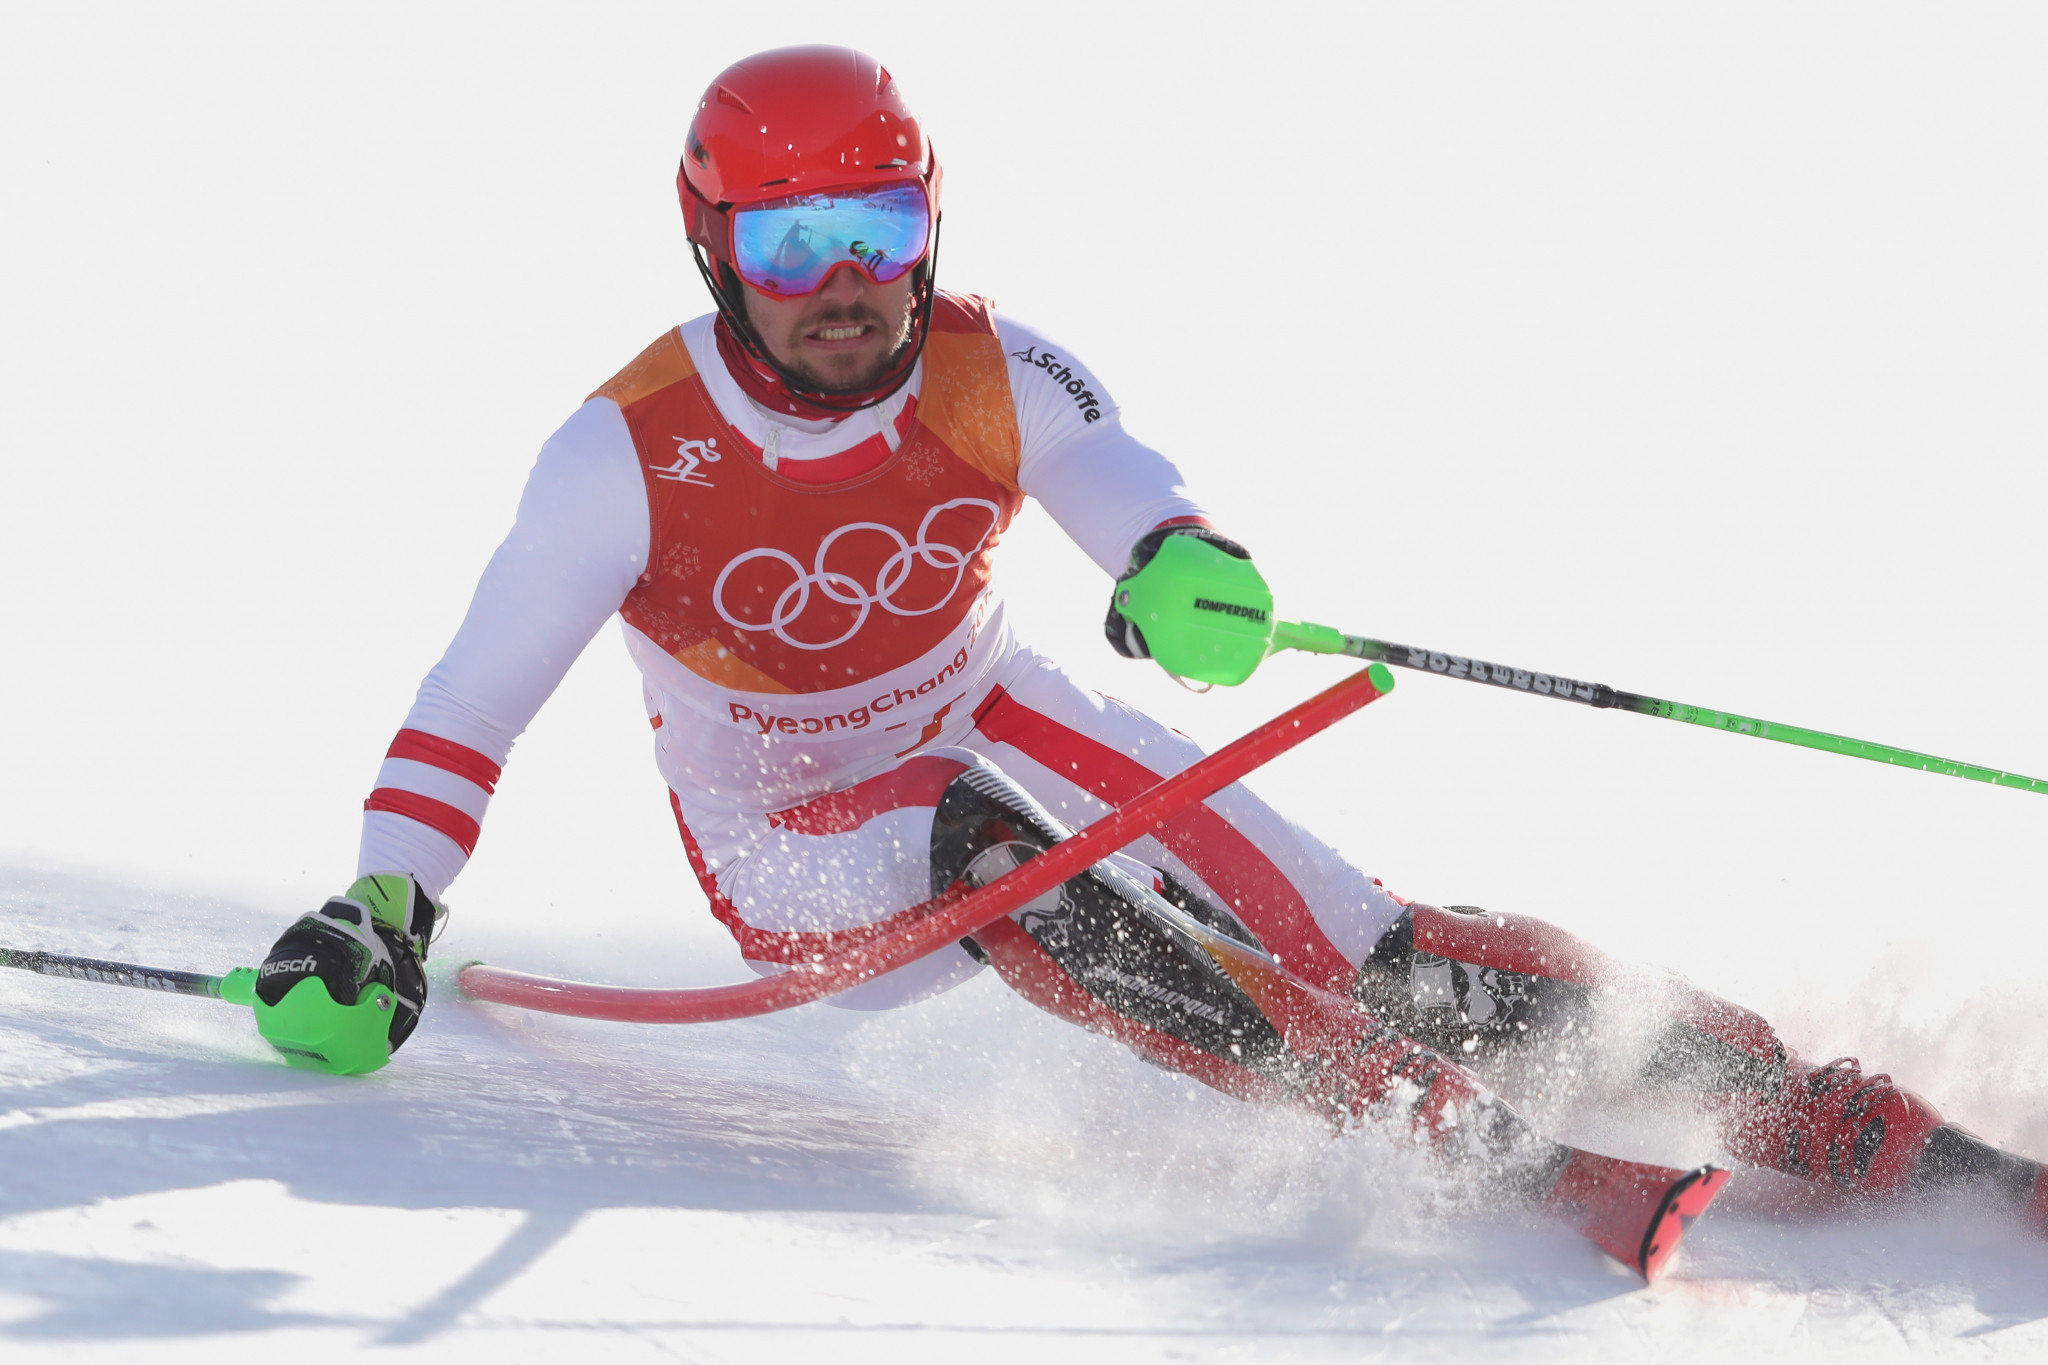 Alpine skiing icon Marcel Hirscher won two Olympic golds for Austria ©Getty Images